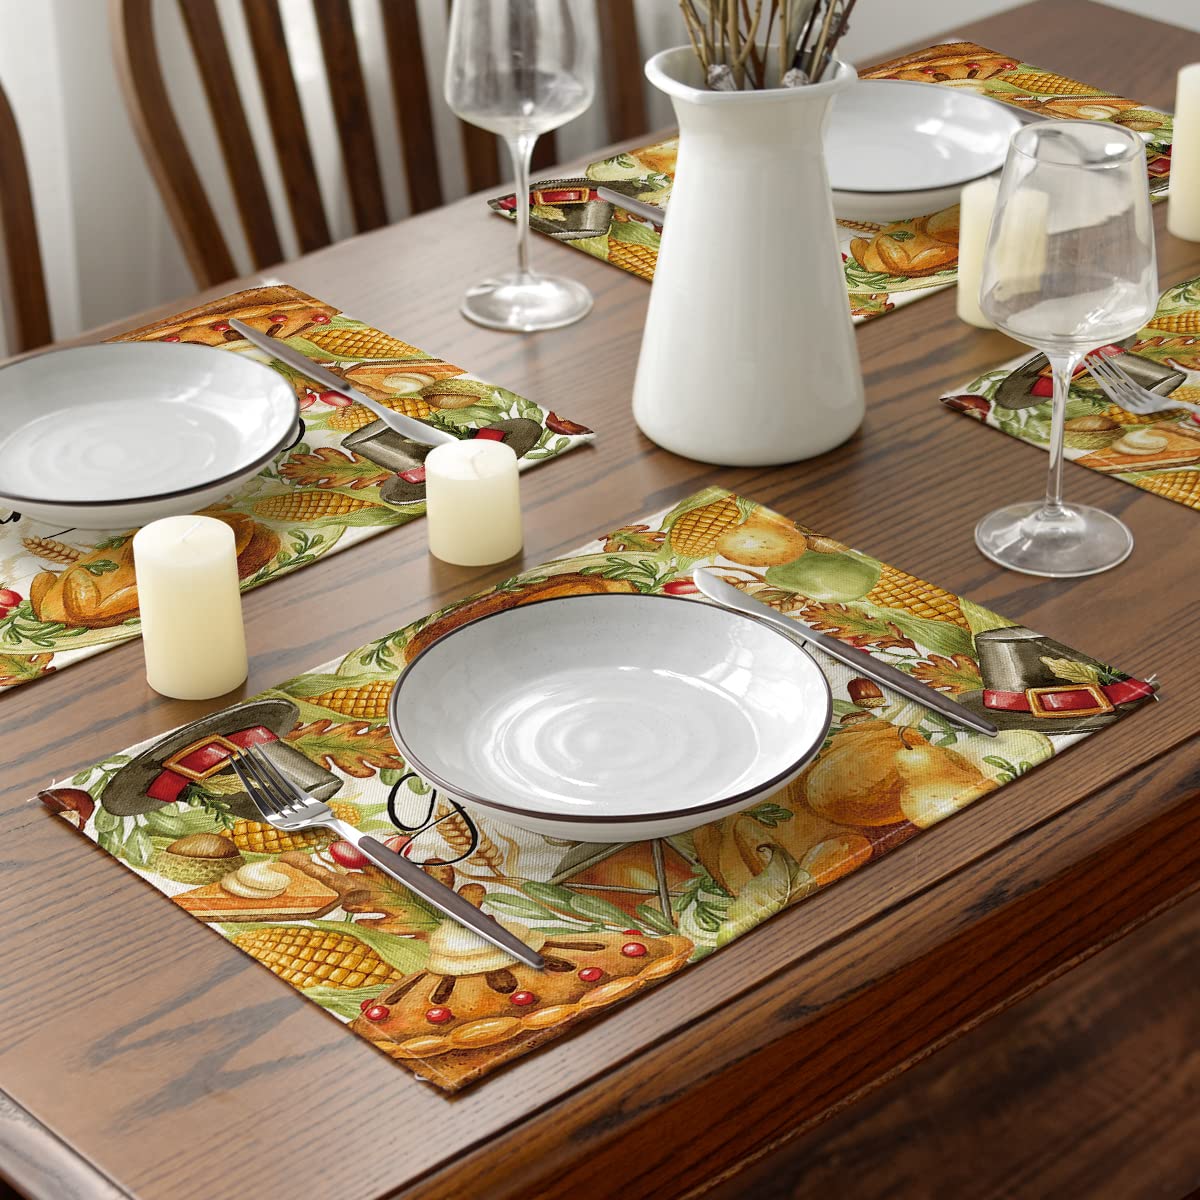 Give Thanks (Thanksgiving themed) Placemats Christian Table Placemat 12.6 In*16.5 In claimedbygoddesigns